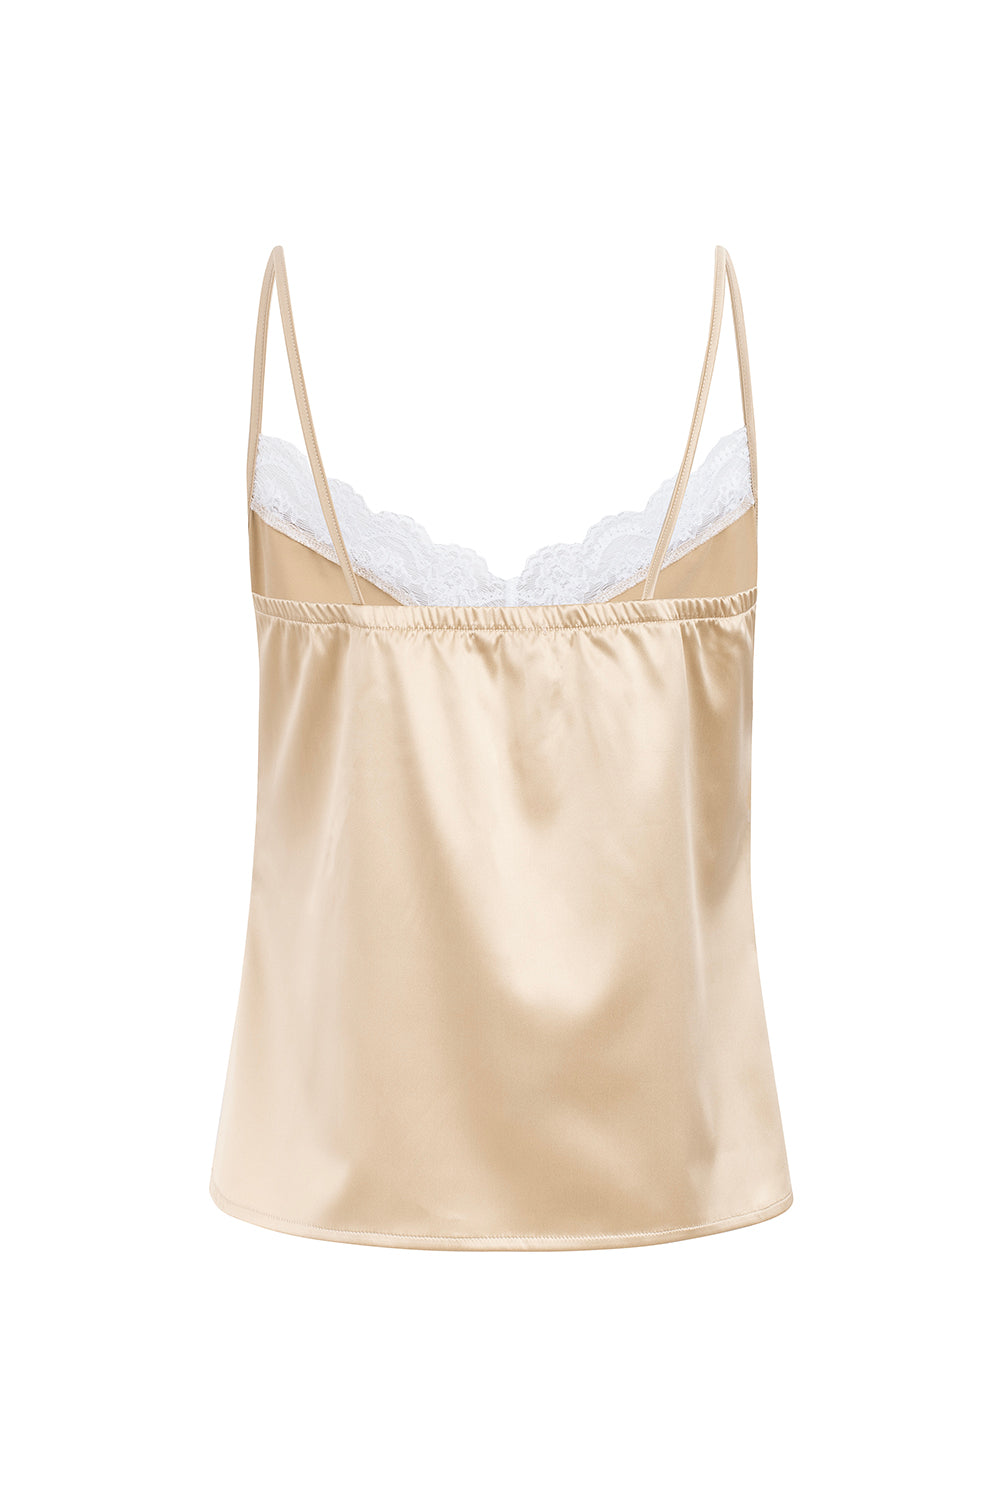 CHAMPAGNE SATIN & LACE TOP (OUT OF STOCK)